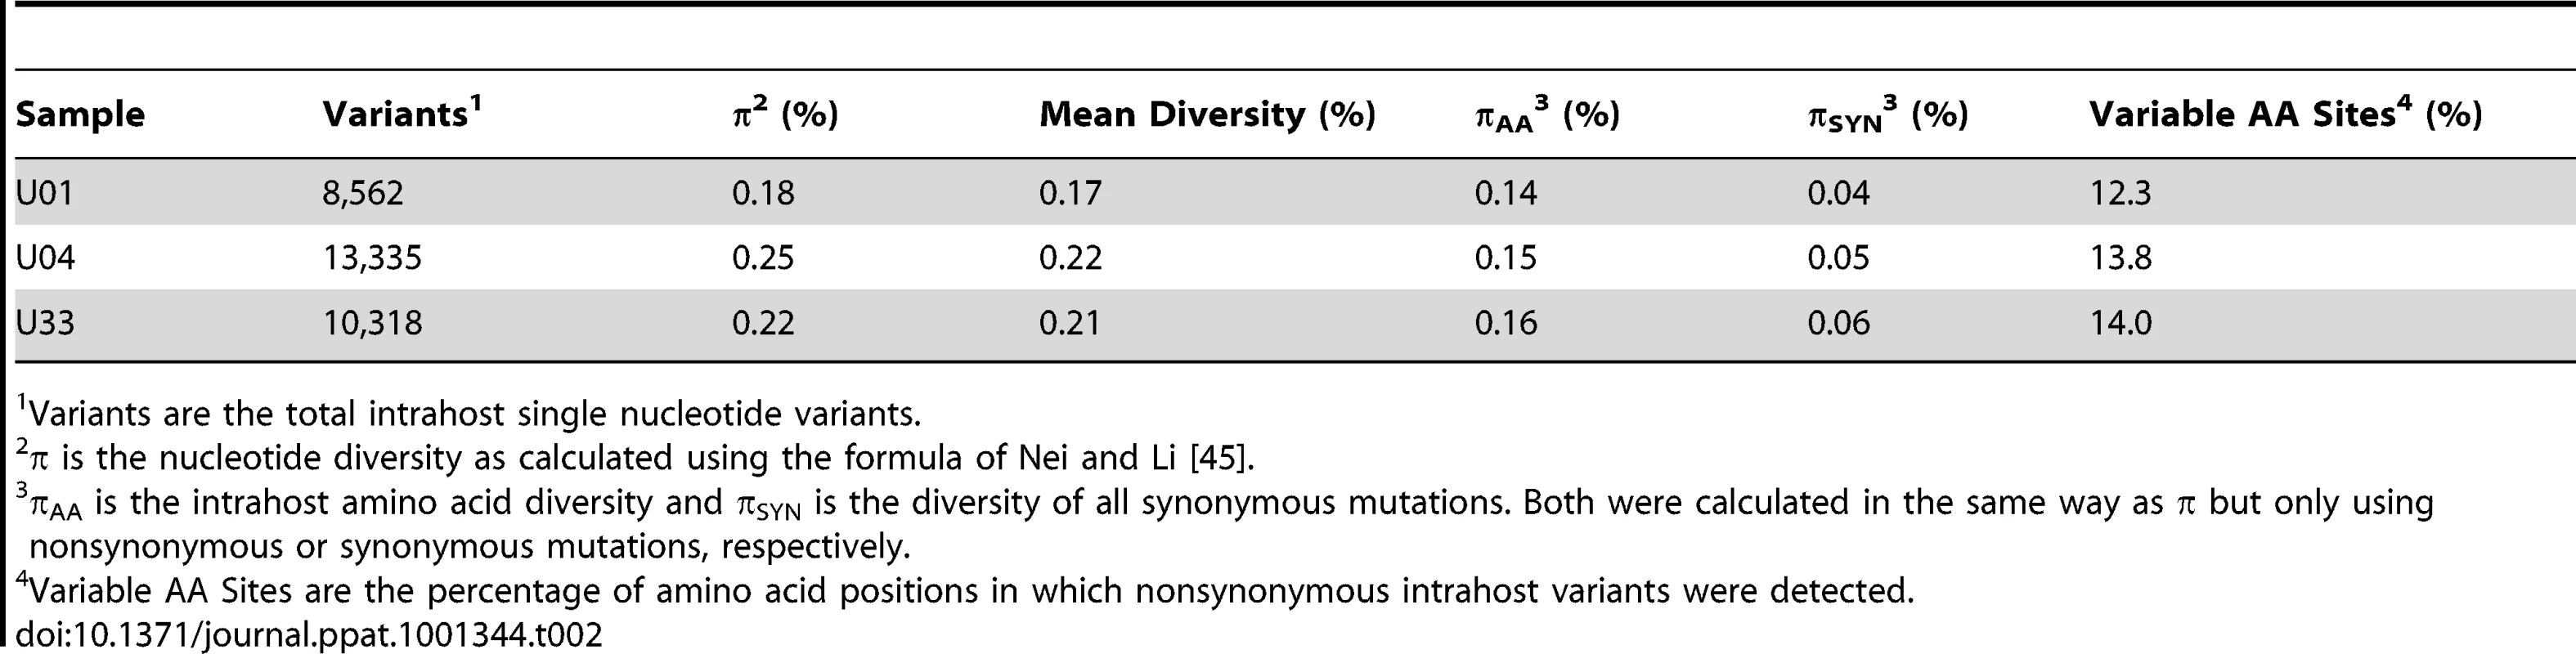 Intrahost diversity of hcmv populations in clinical samples: genome wide averages.